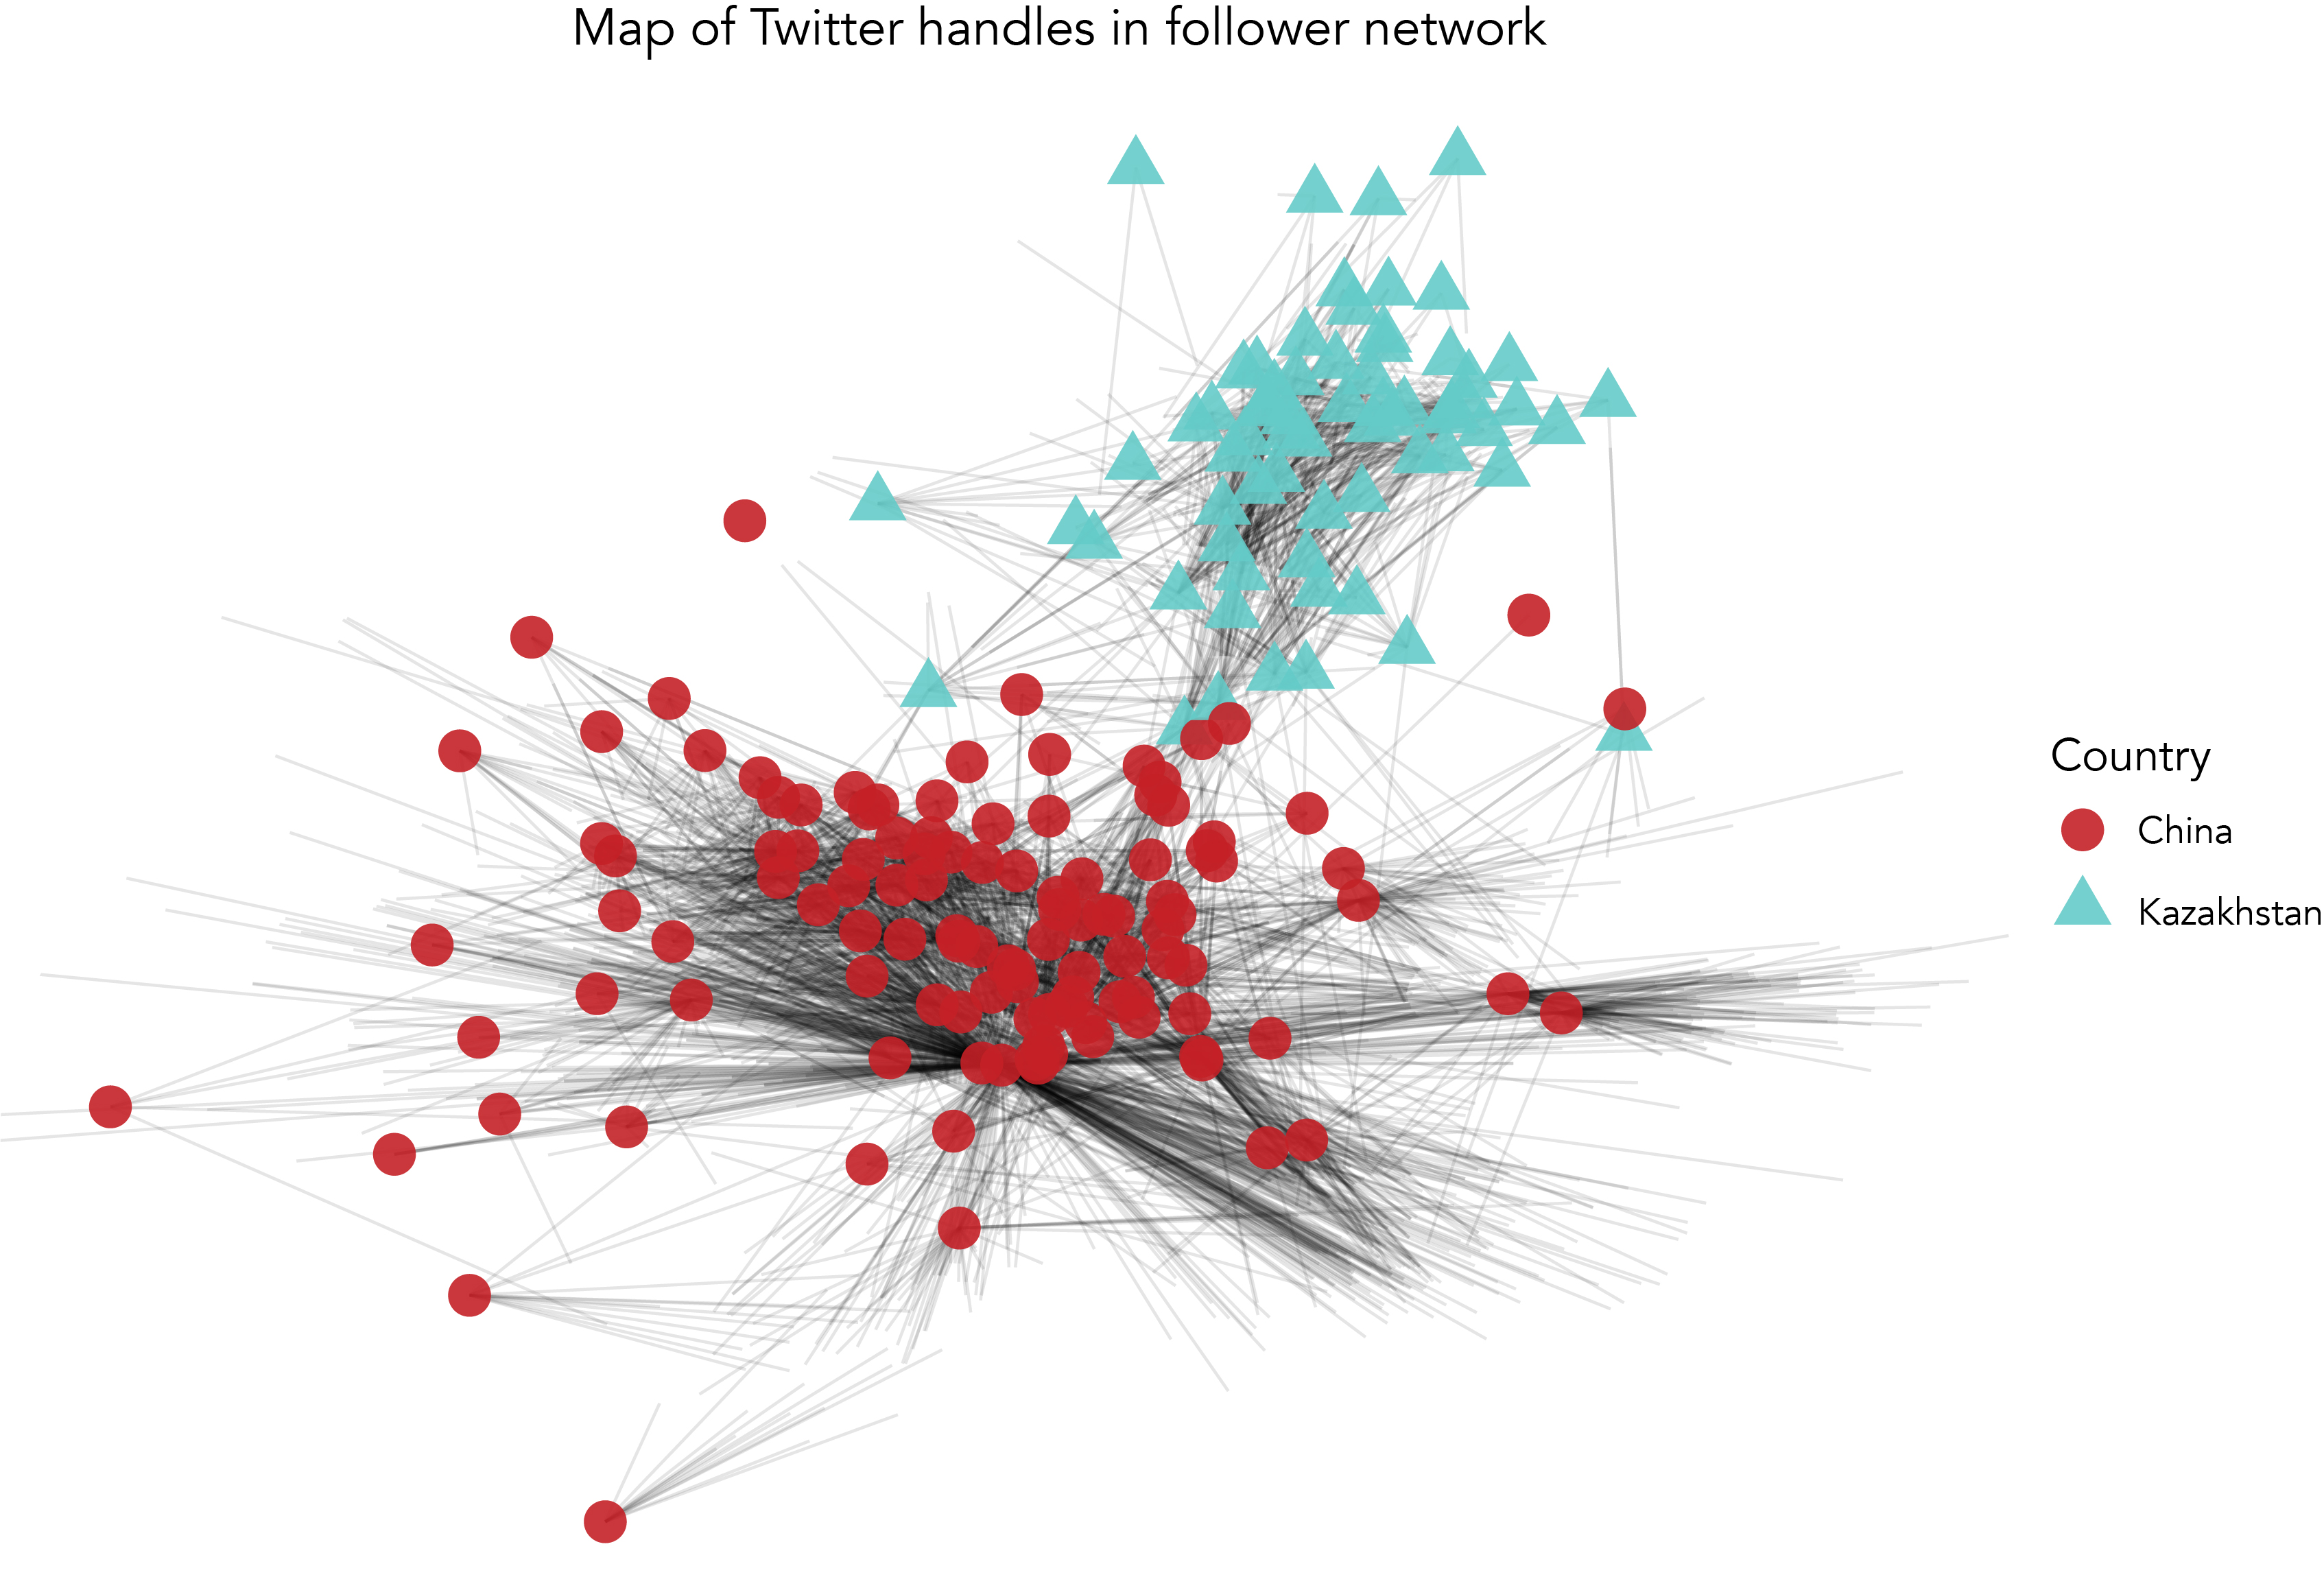 Clustering of Twitter connecton points.